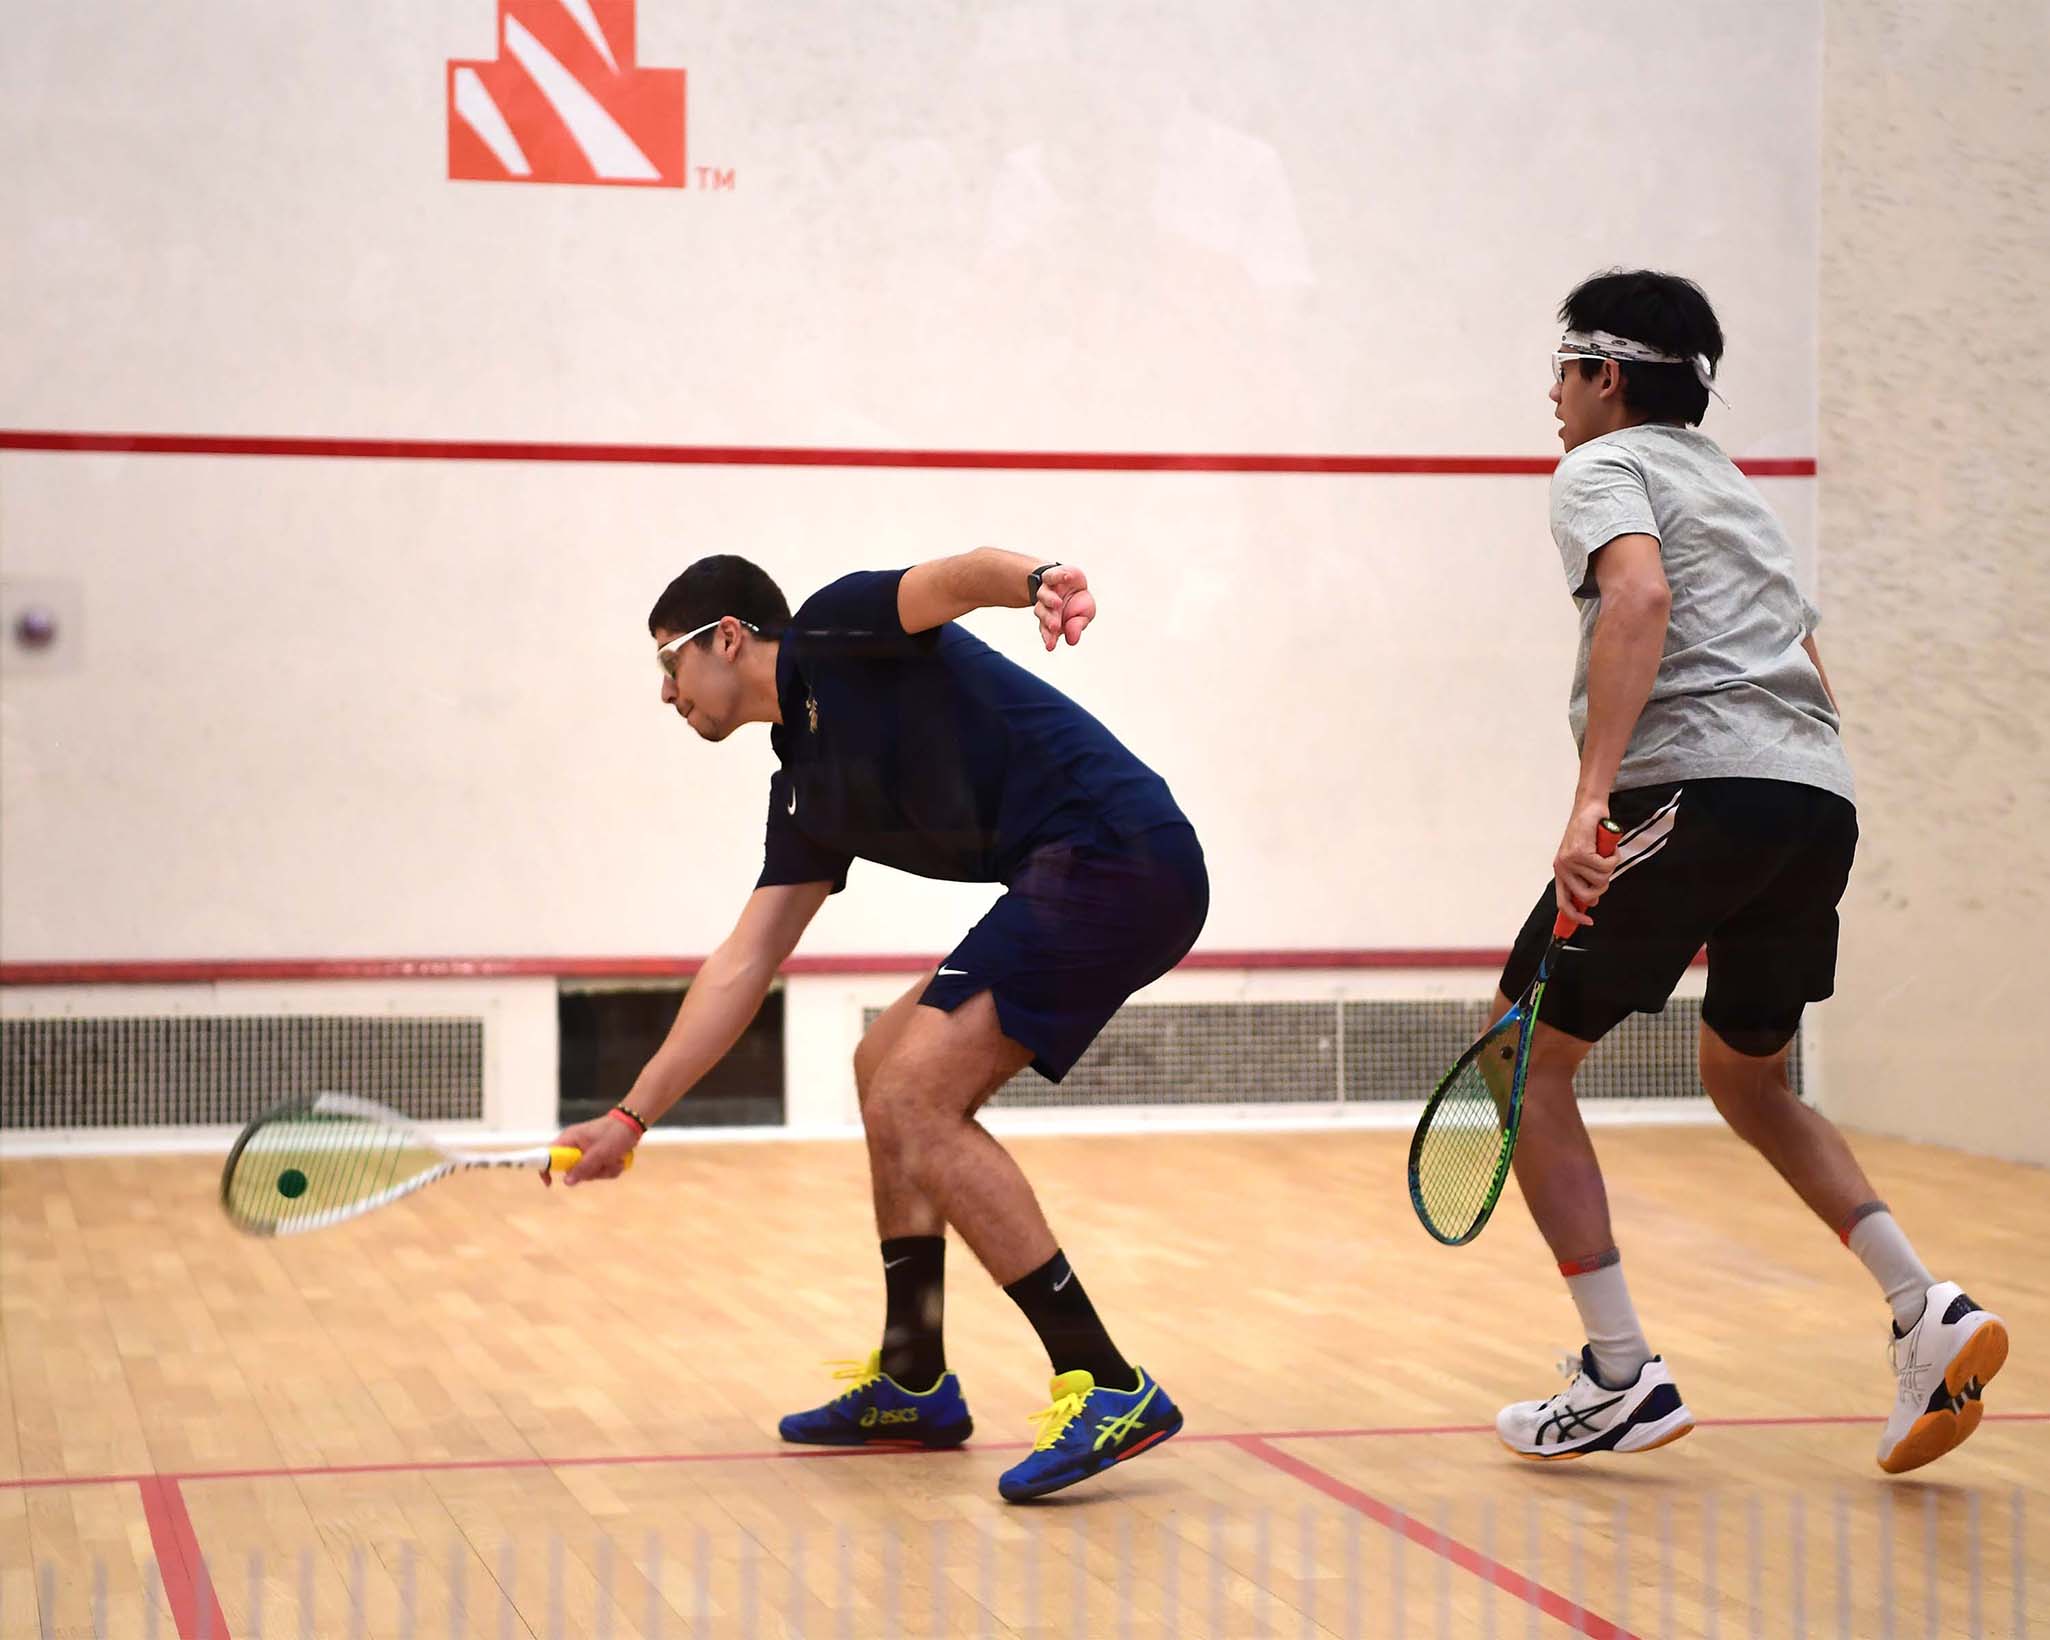 Trinity College's Mohamad Sharaf returns a volley against Princeton University's Daelum Mawji, moving Trinity on to Nationals. One of the many Iconic Images we captured during the Womens & Mens Squash matches between Trinity College and Princeton University which took place January 28th 2023.